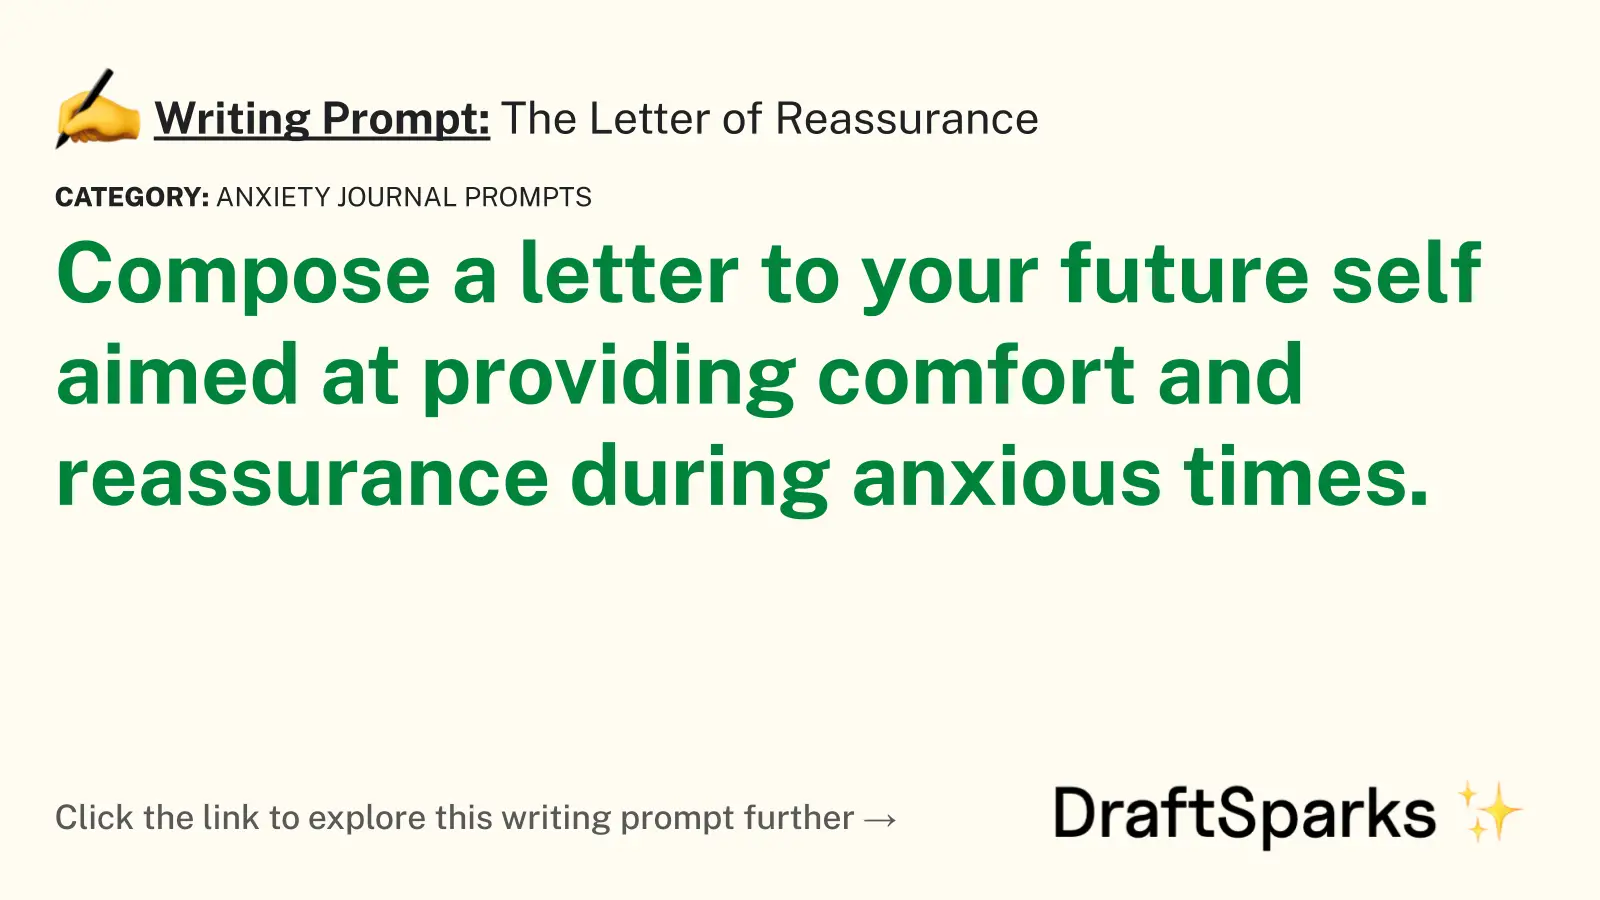 The Letter of Reassurance